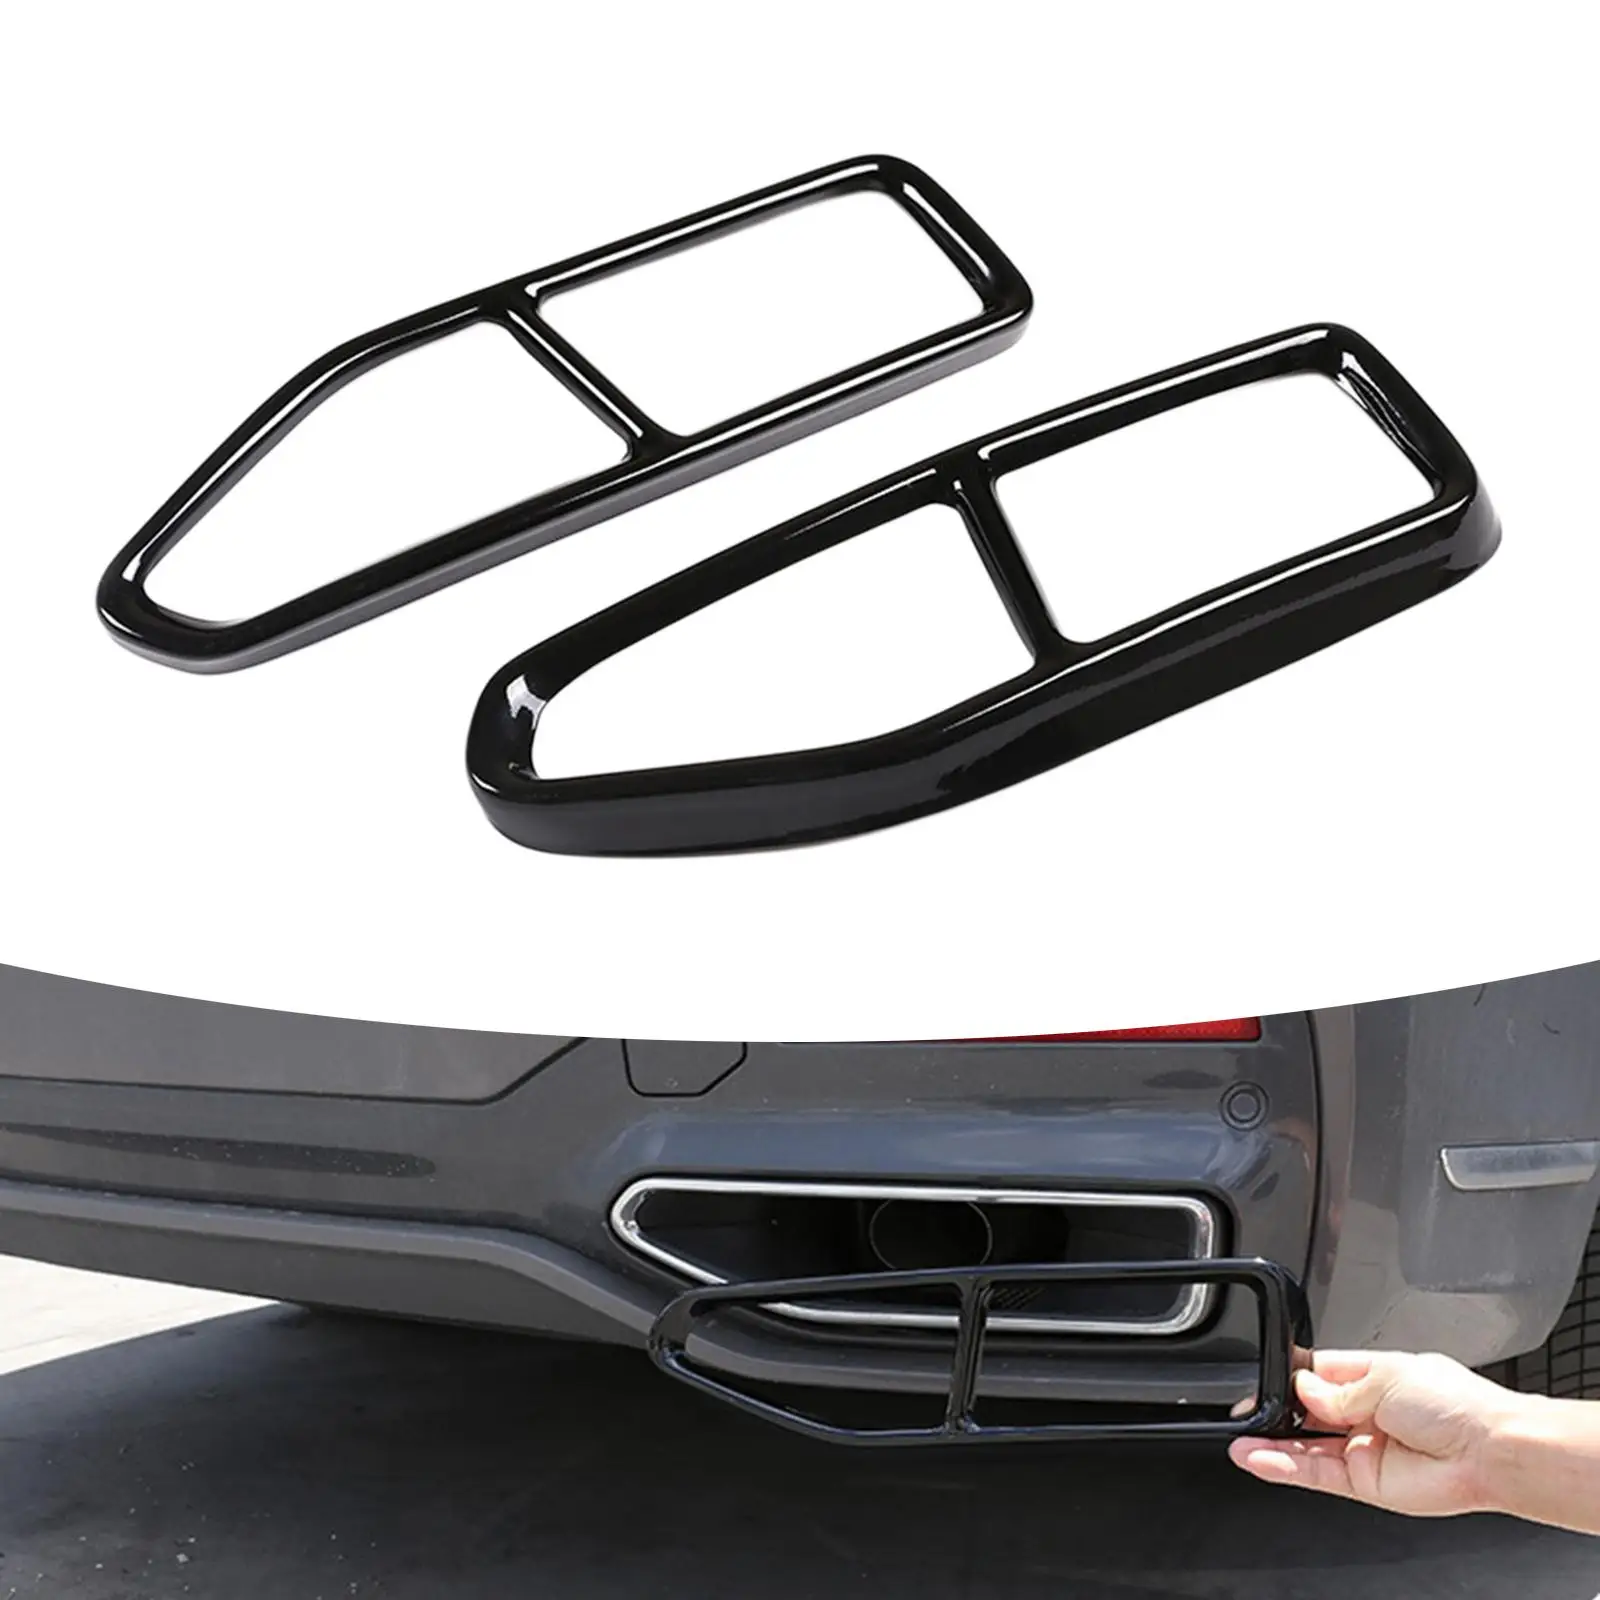 2x Tailpipe Trim Frame Protection Cover Scratchproof Exhaust Pipe Output Cover for BMW 7 G11 2019-2020 G12 Auto Accessories